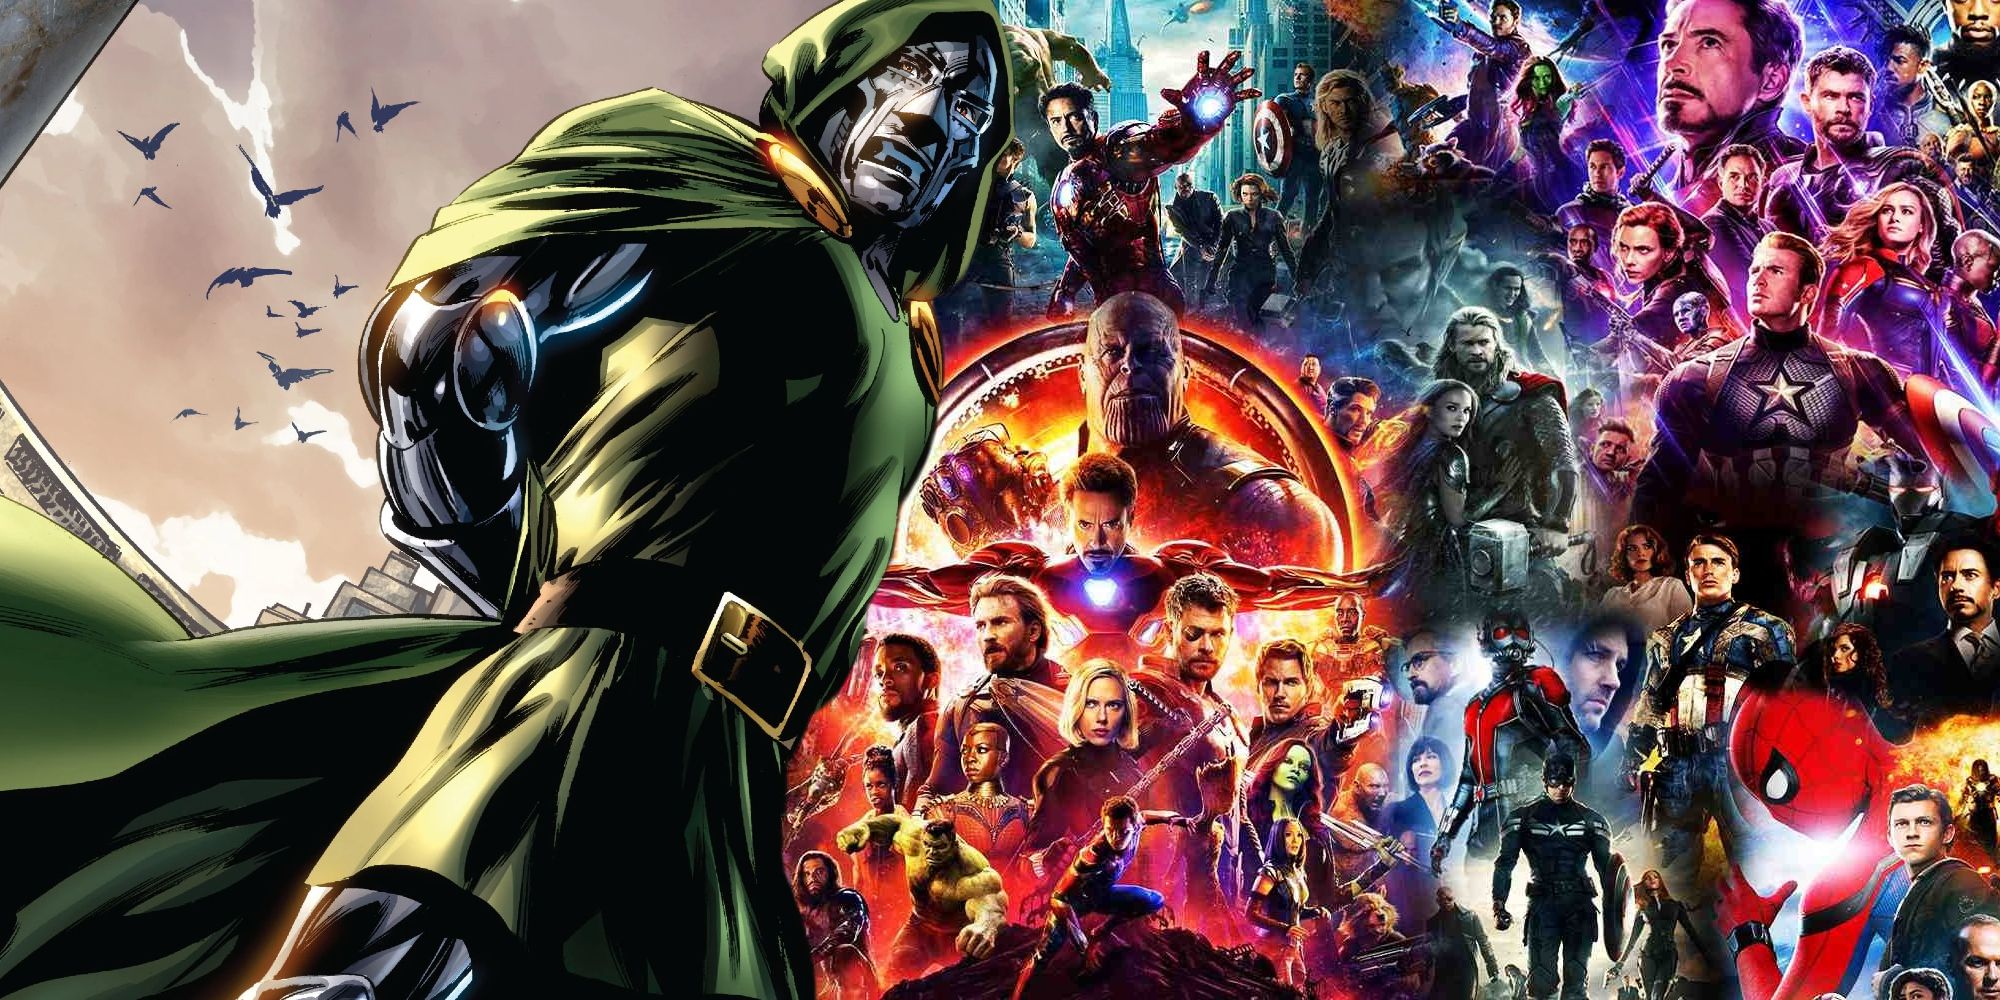 The combined posters of the Infinity Saga next to artwork of Doctor Doom from Marvel Comics